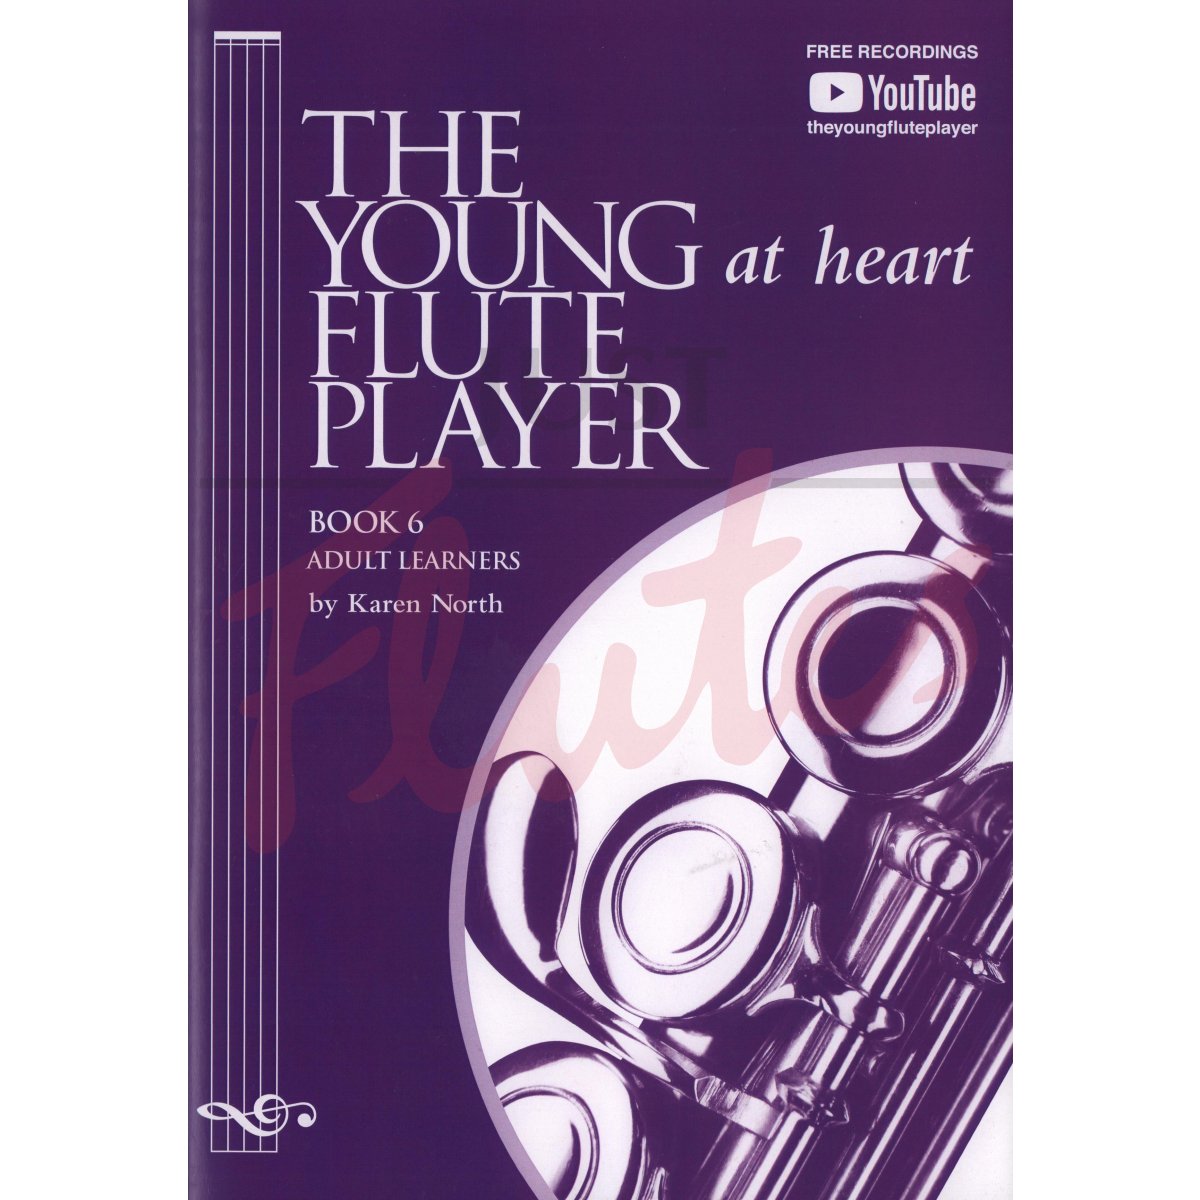 The Young (at Heart) Flute Player Book 6 Adult Learners